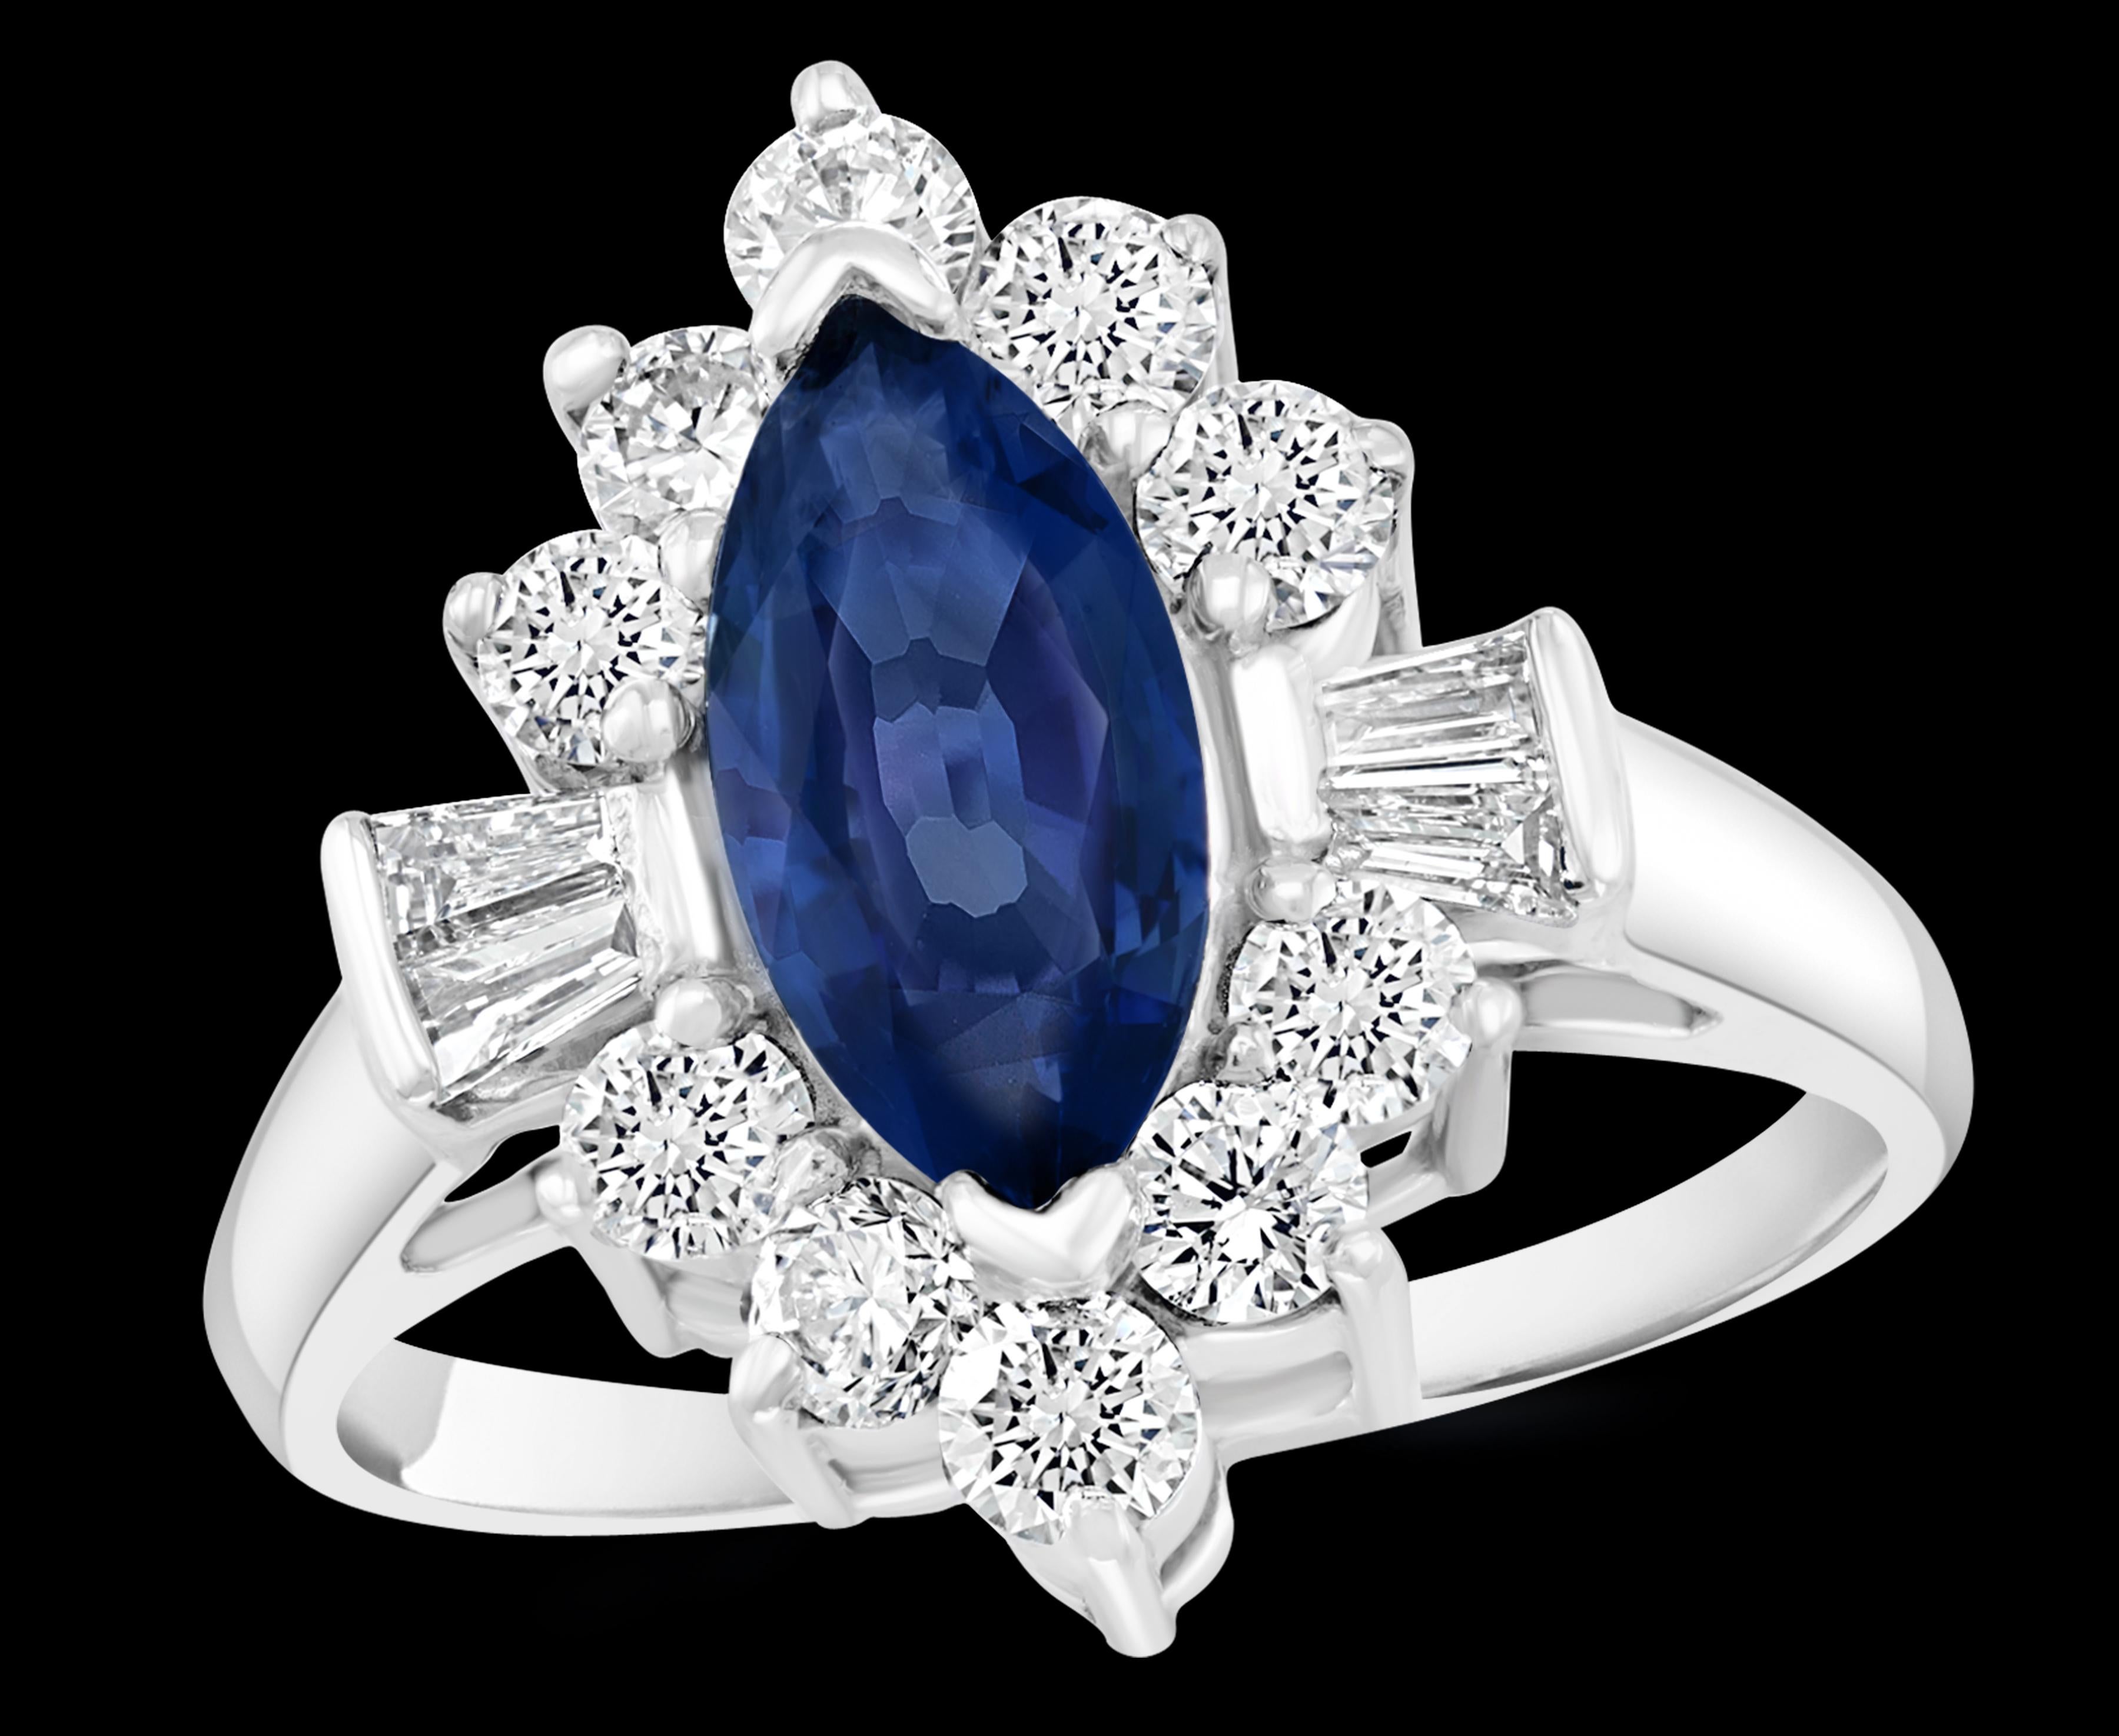 Approximately 2.5 Ct Blue Sapphire & Approximately 1.2 Ct Diamond Cocktail Ring in 18 Karat White Gold Estate
2.5 Carat of  Marquise shape blue Sapphire. This is an estate piece and stone was not taken  out to weigh the actual weight . 
10 Round